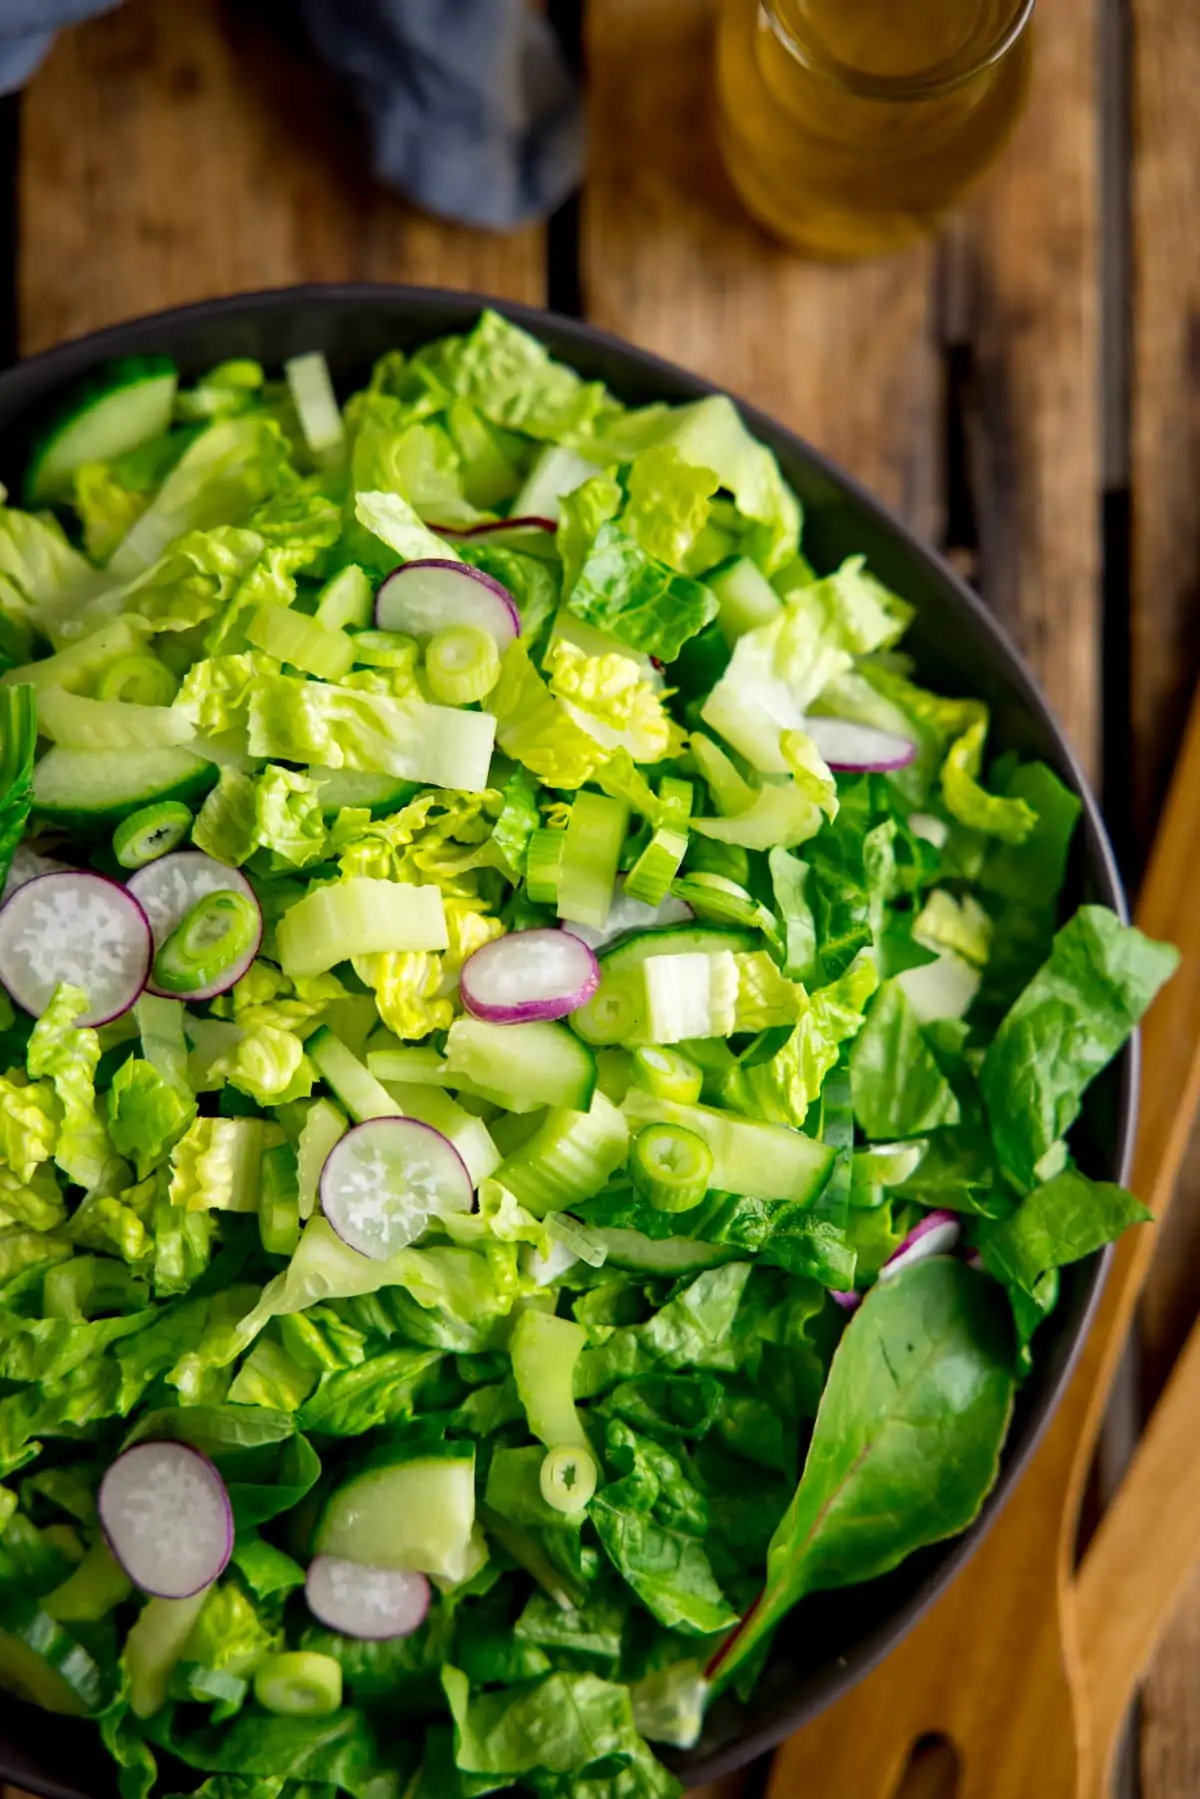 Simple Green Salad with Vinaigrette dressing - Nicky's Kitchen Sanctuary